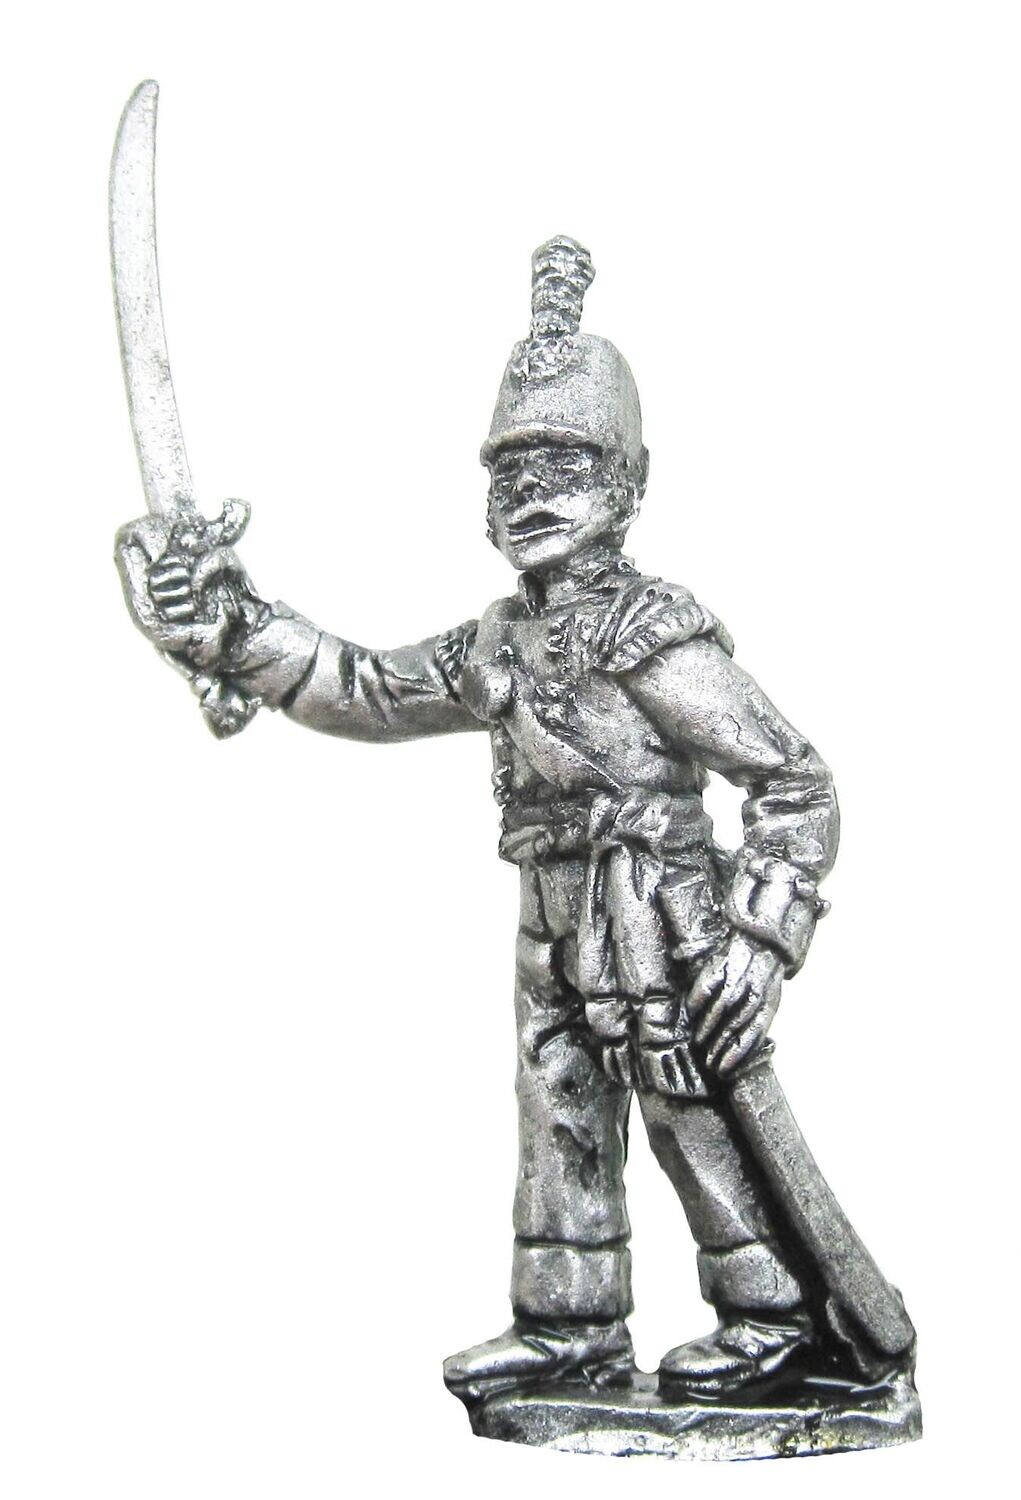 28mm Napoleonic British light infantry officer. (suitable for our 71st Highlanders)